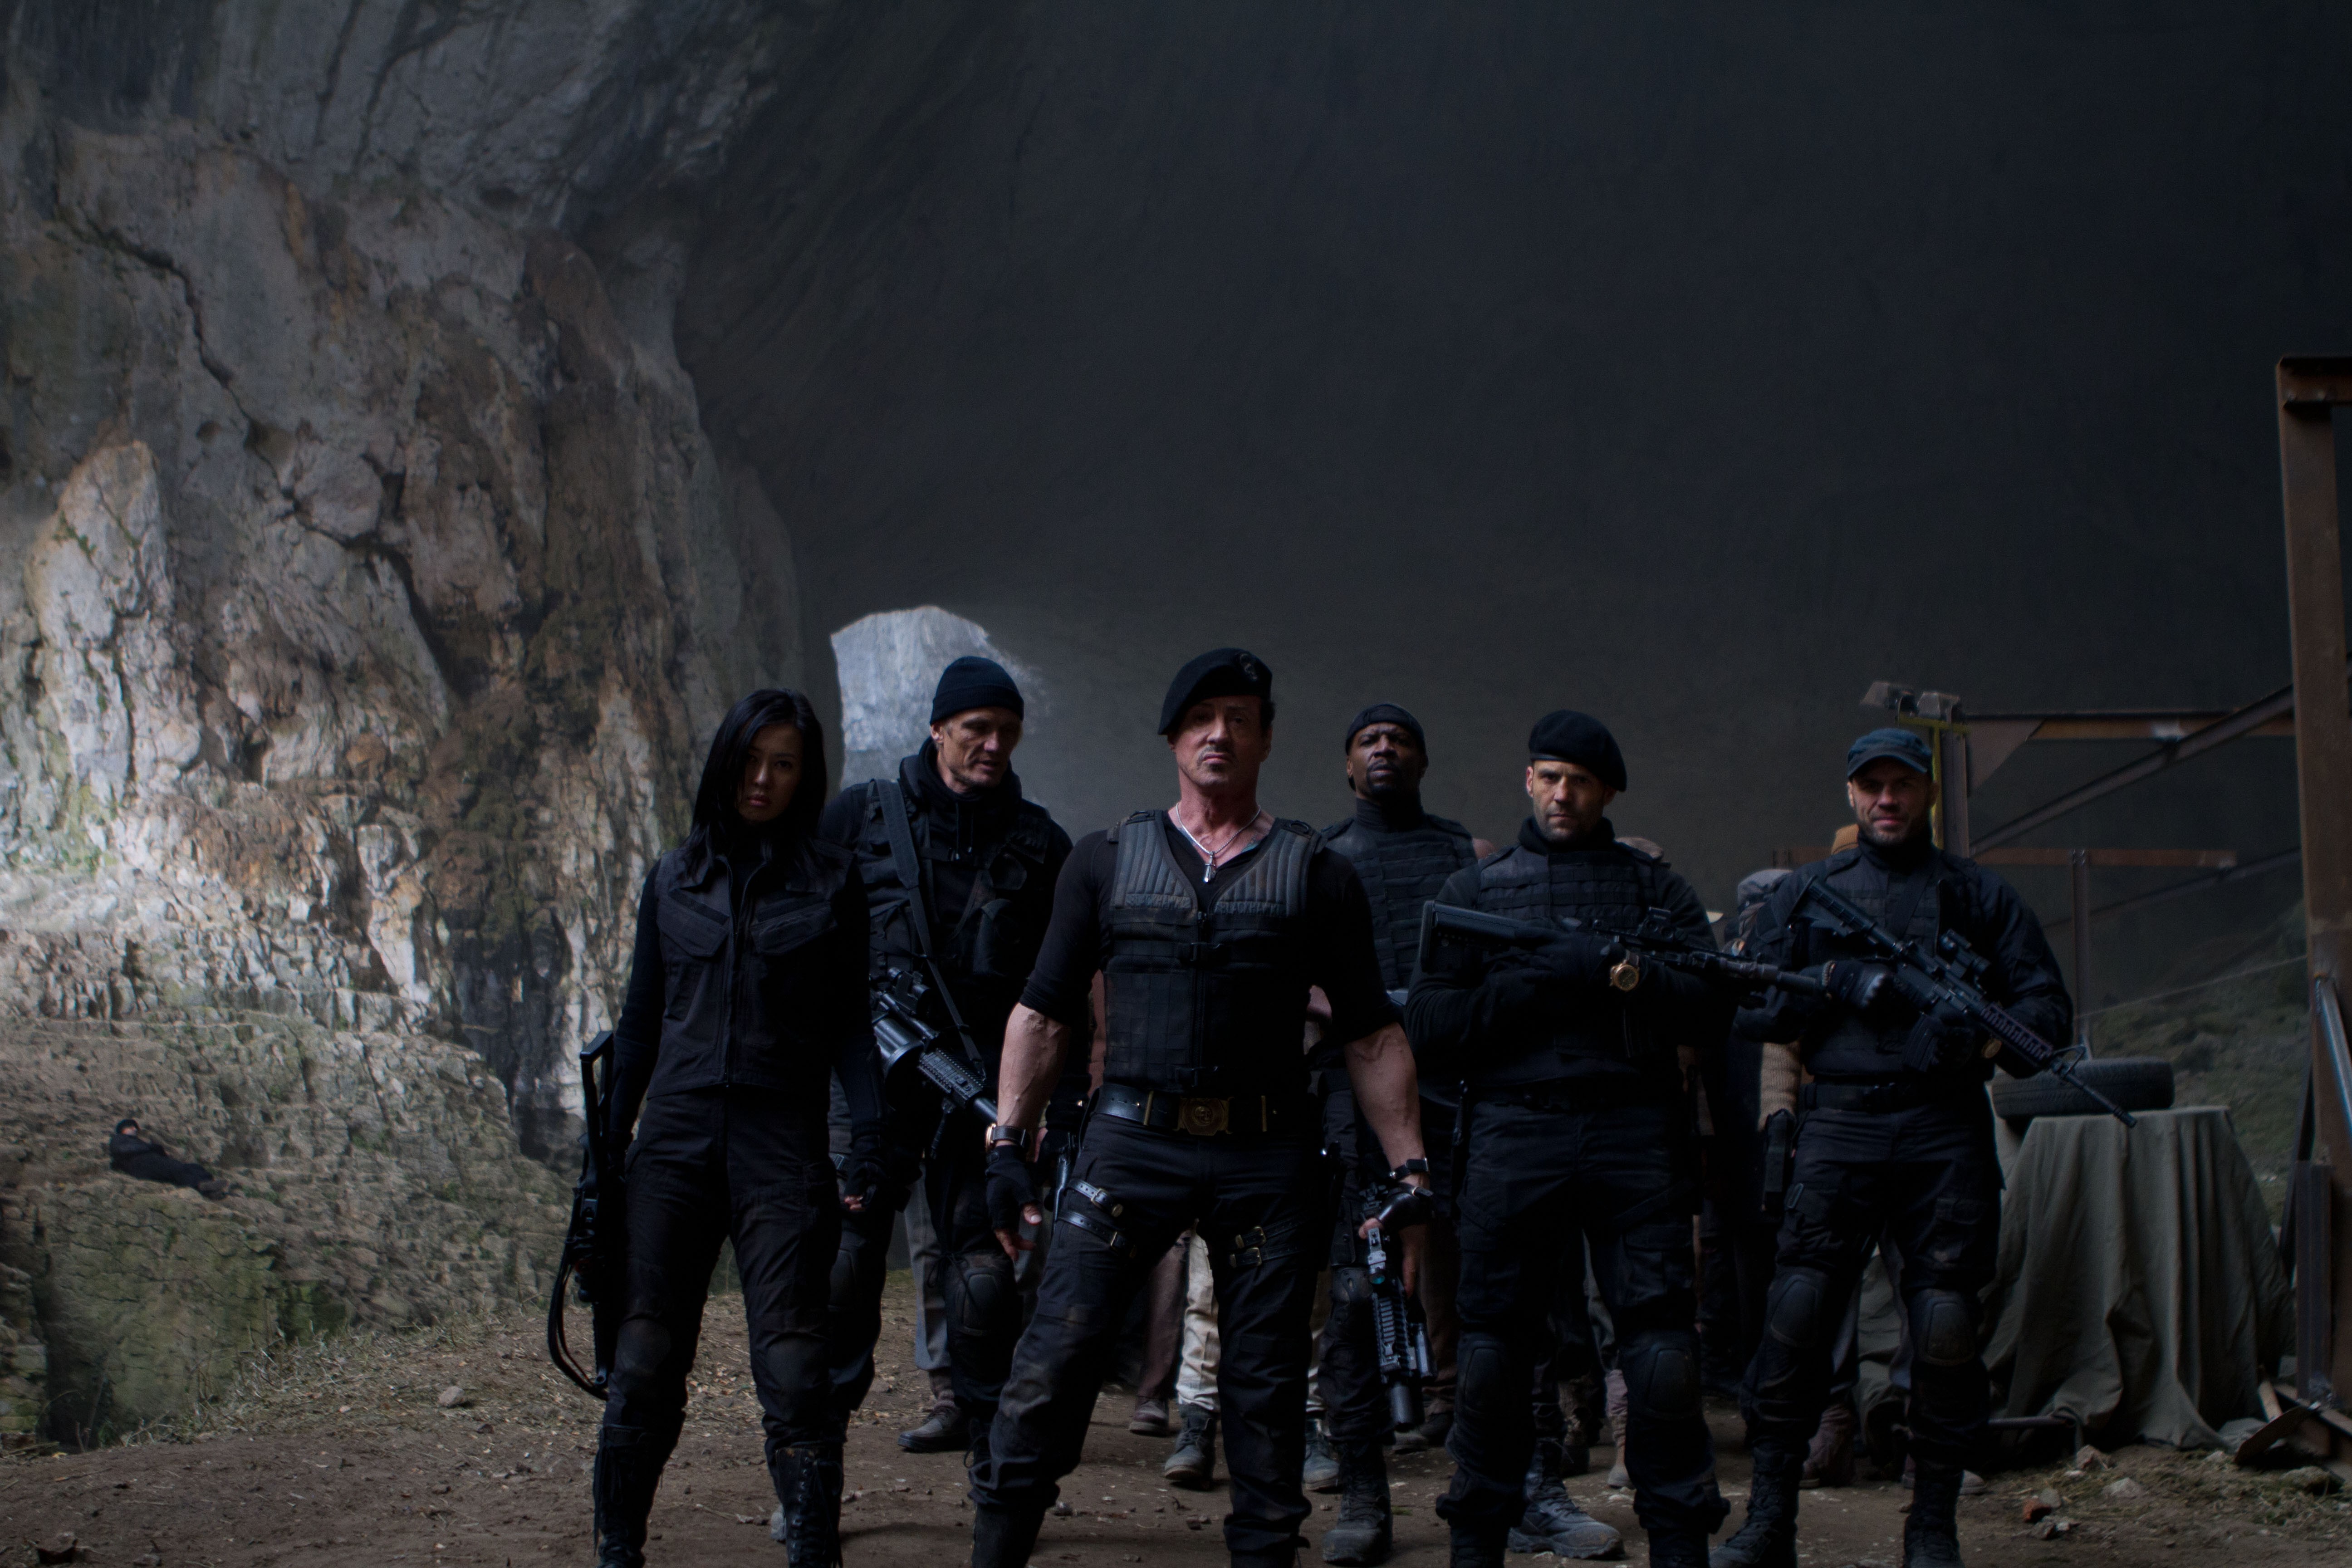 movie, the expendables 2, barney ross, dolph lundgren, gunnar jensen, hale caesar, jason statham, lee christmas, maggie (the expendables), nan yu, randy couture, sylvester stallone, terry crews, toll road, the expendables 8K